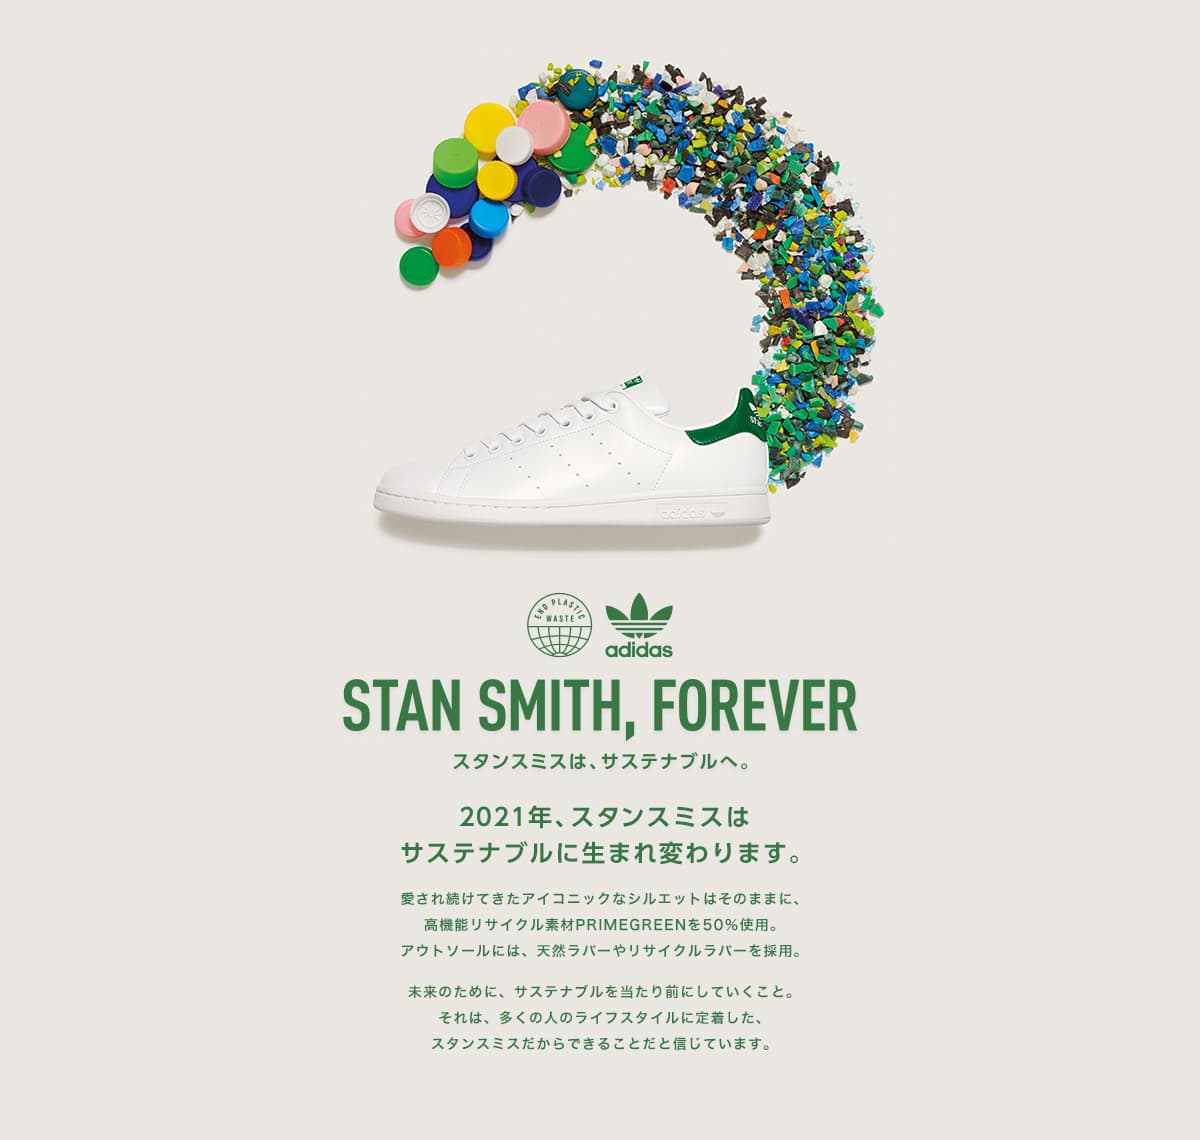 "adidas stansmith forever"